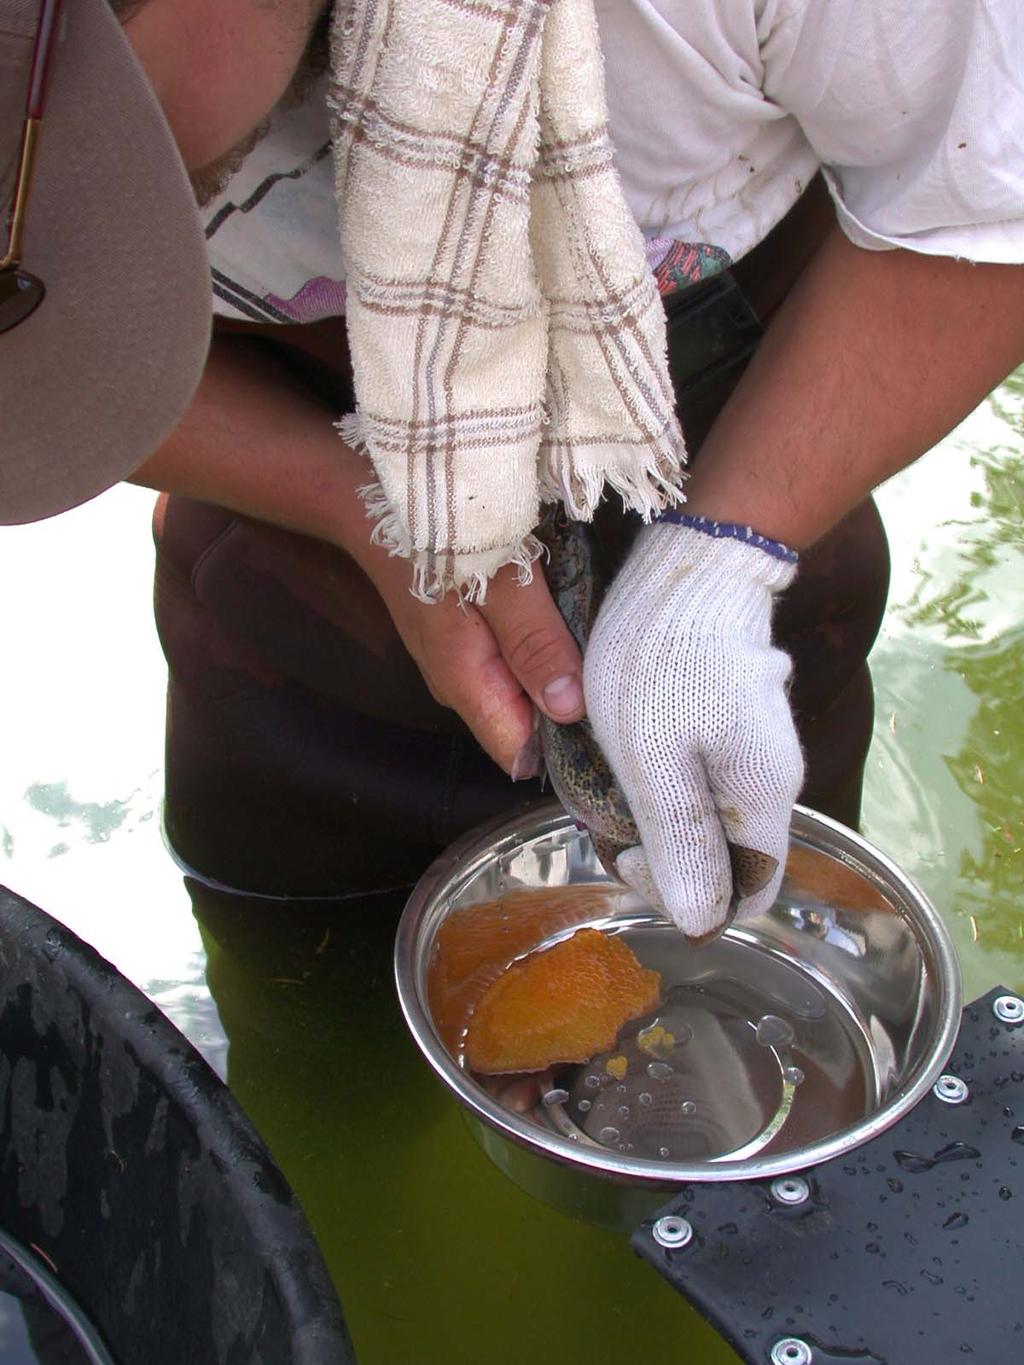 In an attempt to preserve the unique genetic stocks of redband trout that exist in the lakes of the Flathead